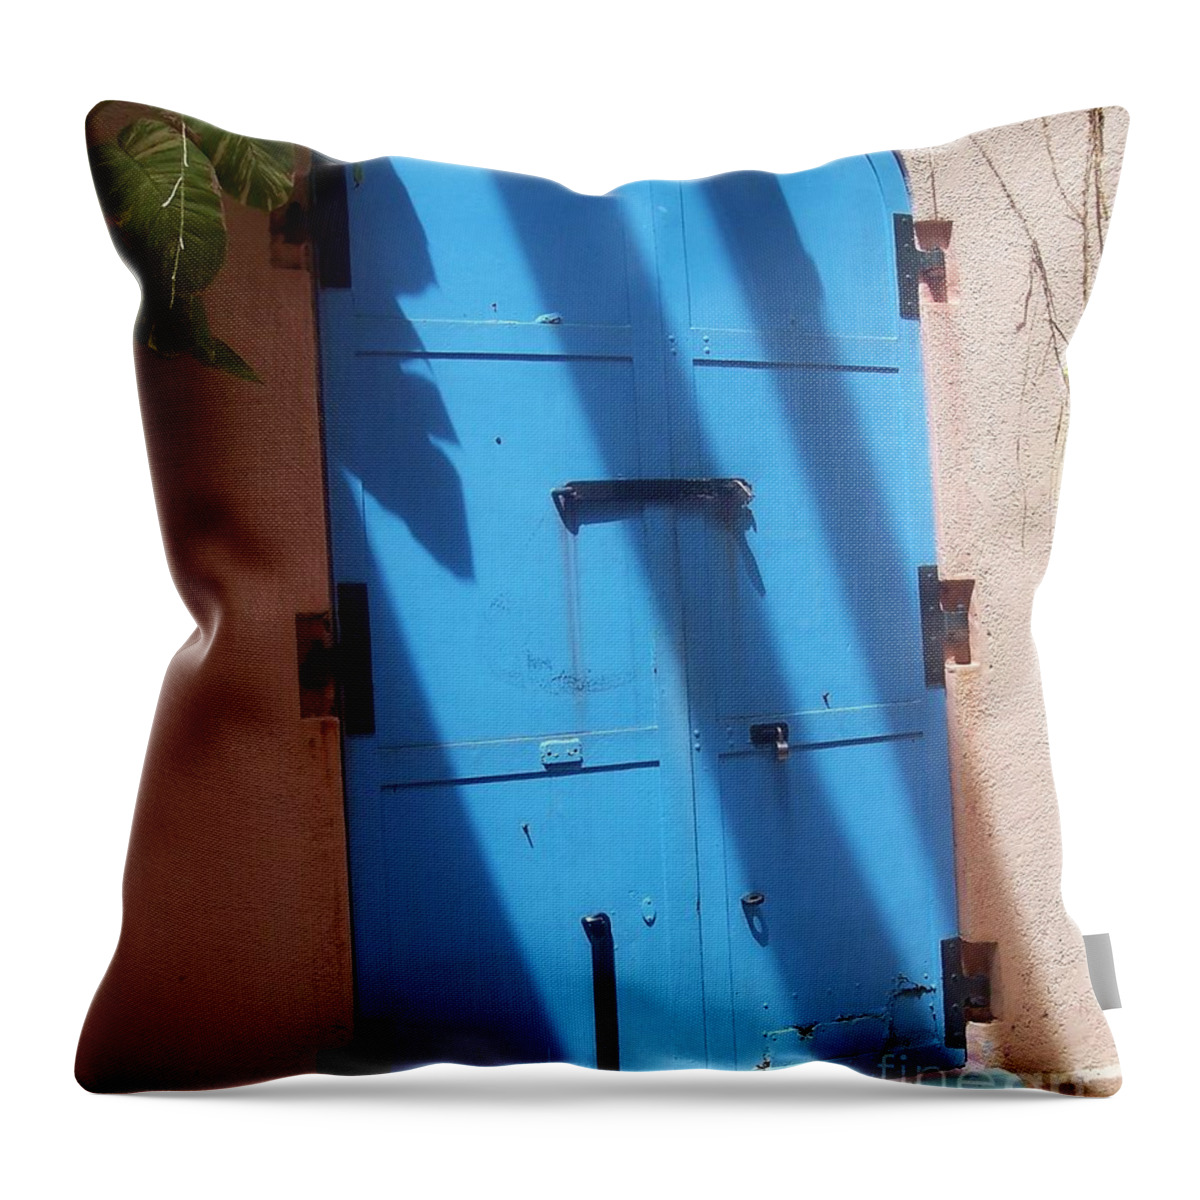 Architecture Throw Pillow featuring the photograph The Blue Door by Debbi Granruth